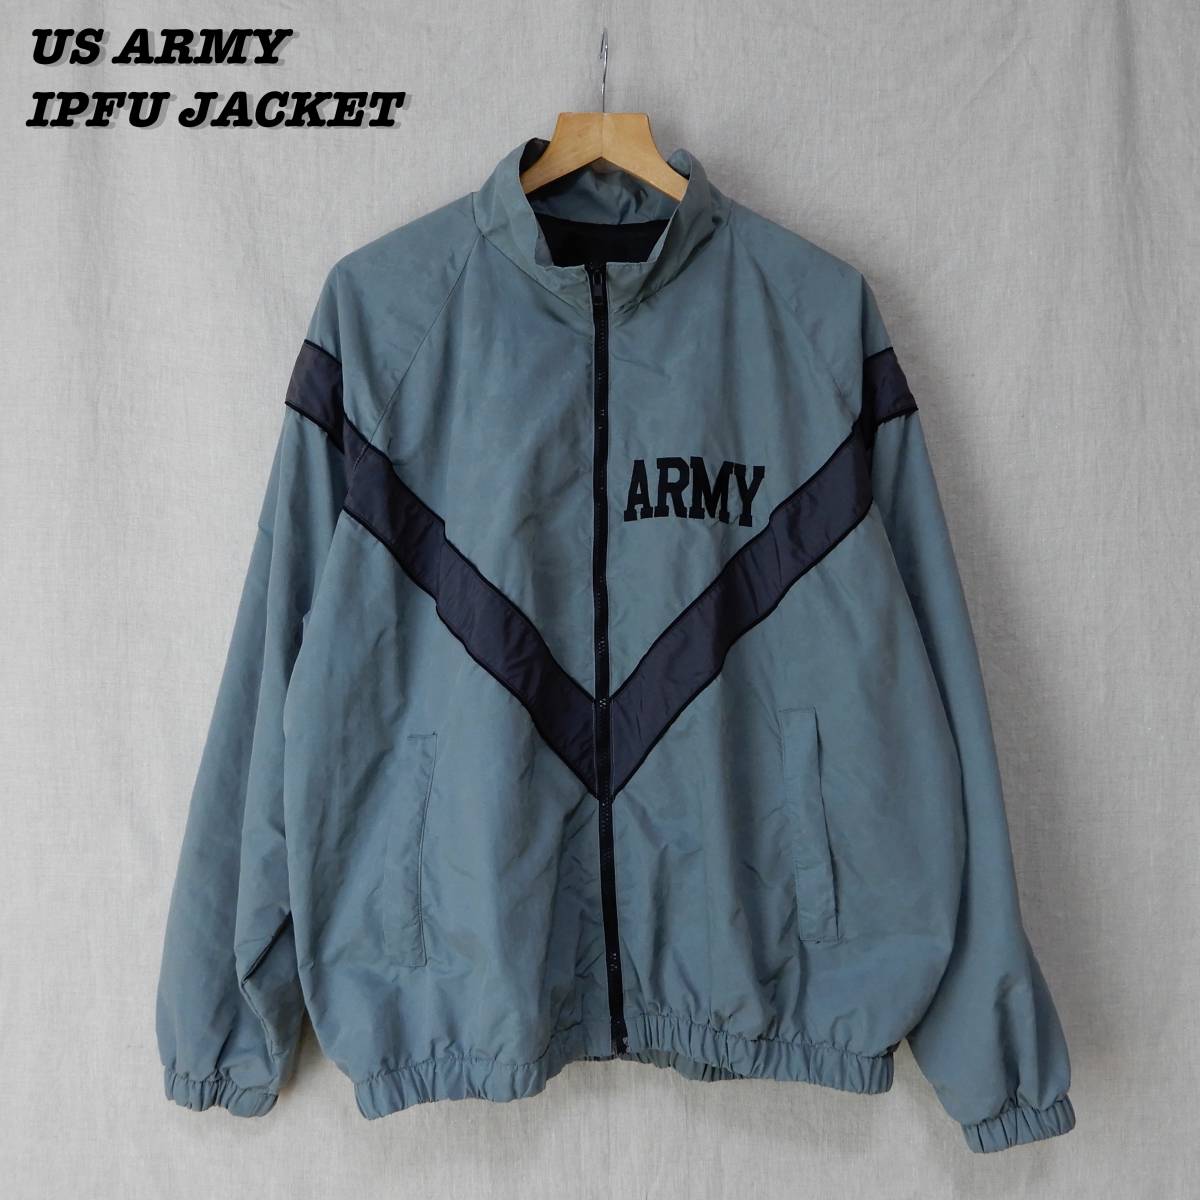 US ARMY IPFU JACKET About L/R 304013 アメリカ軍 トレーニング